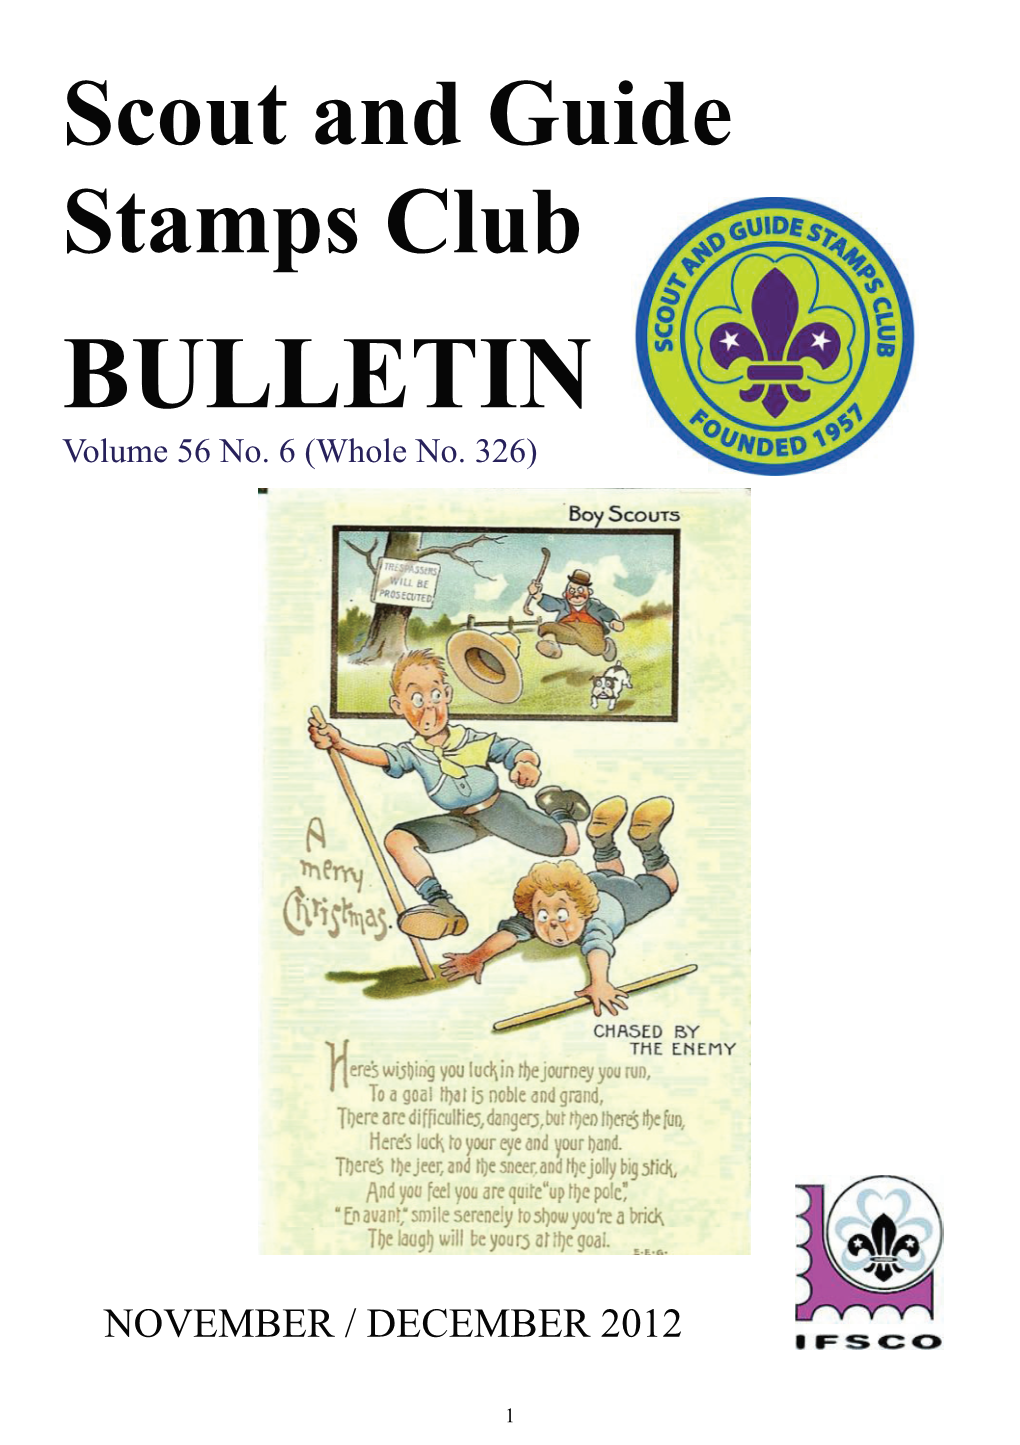 Scout and Guide Stamps Club BULLETIN #326